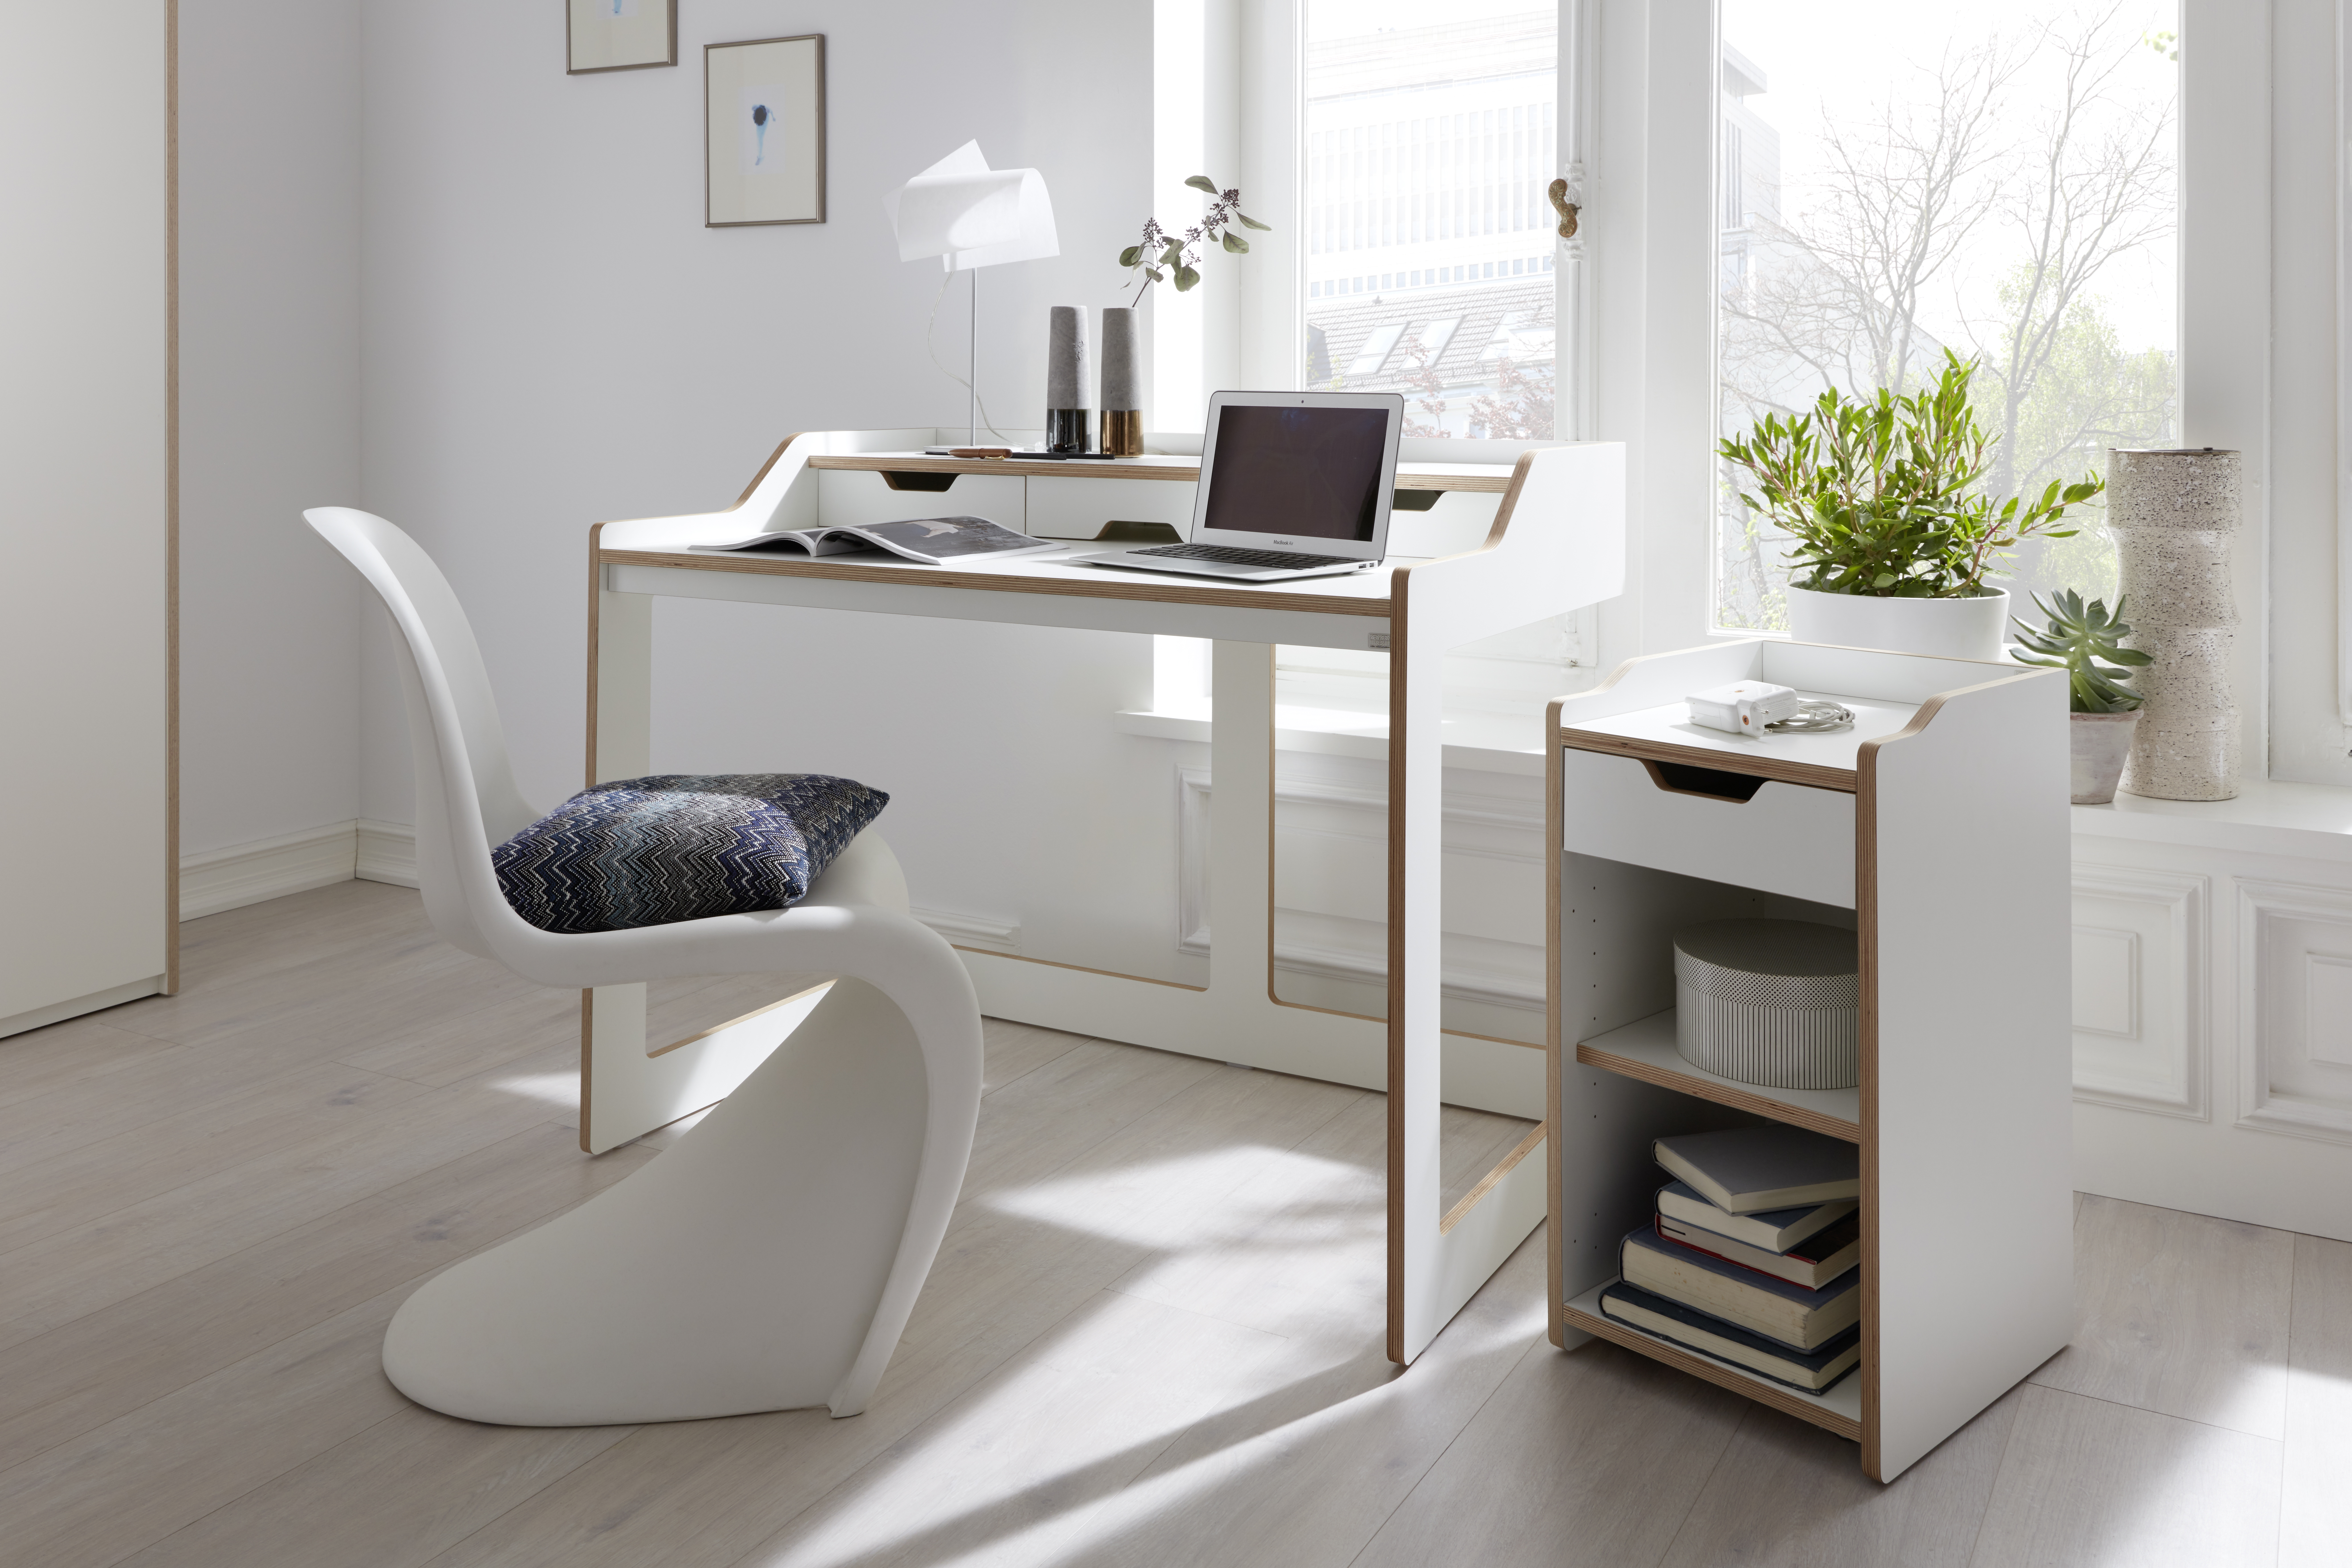 German Furniture for Small Spaces, Condos, Apartments | Mueller Emform USA